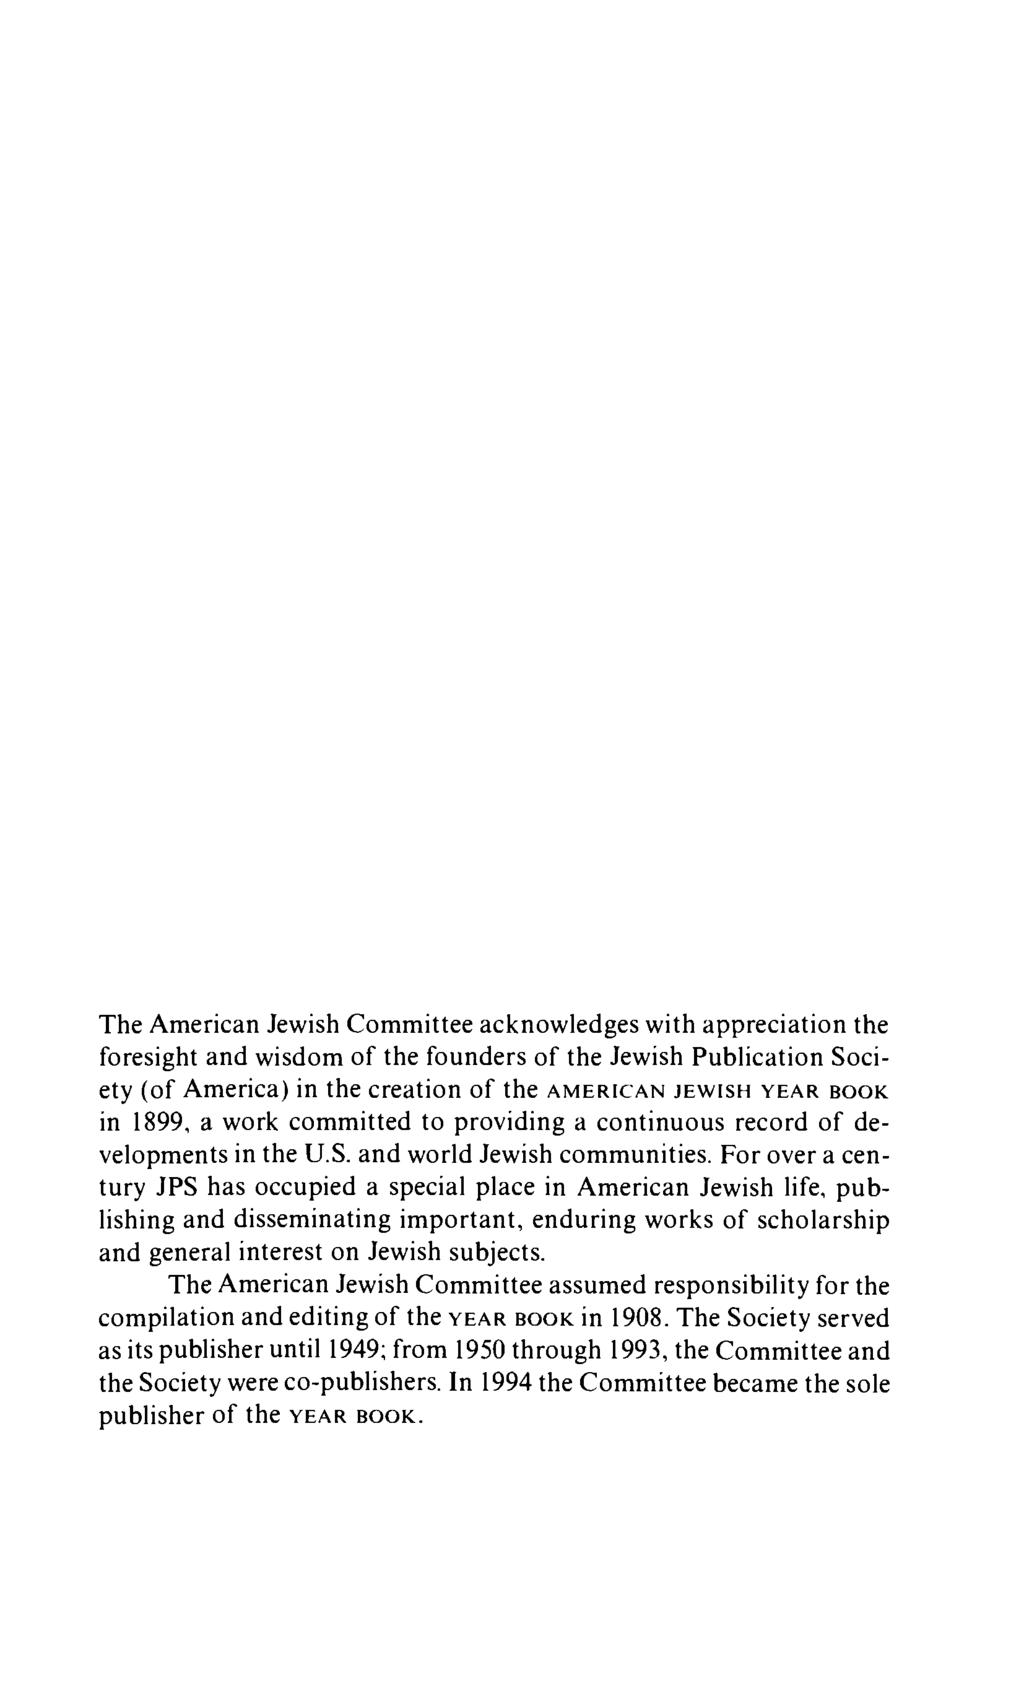 The American Jewish Committee acknowledges with appreciation the foresight and wisdom of the founders of the Jewish Publication Society (of America) in the creation of the AMERICAN JEWISH YEAR BOOK